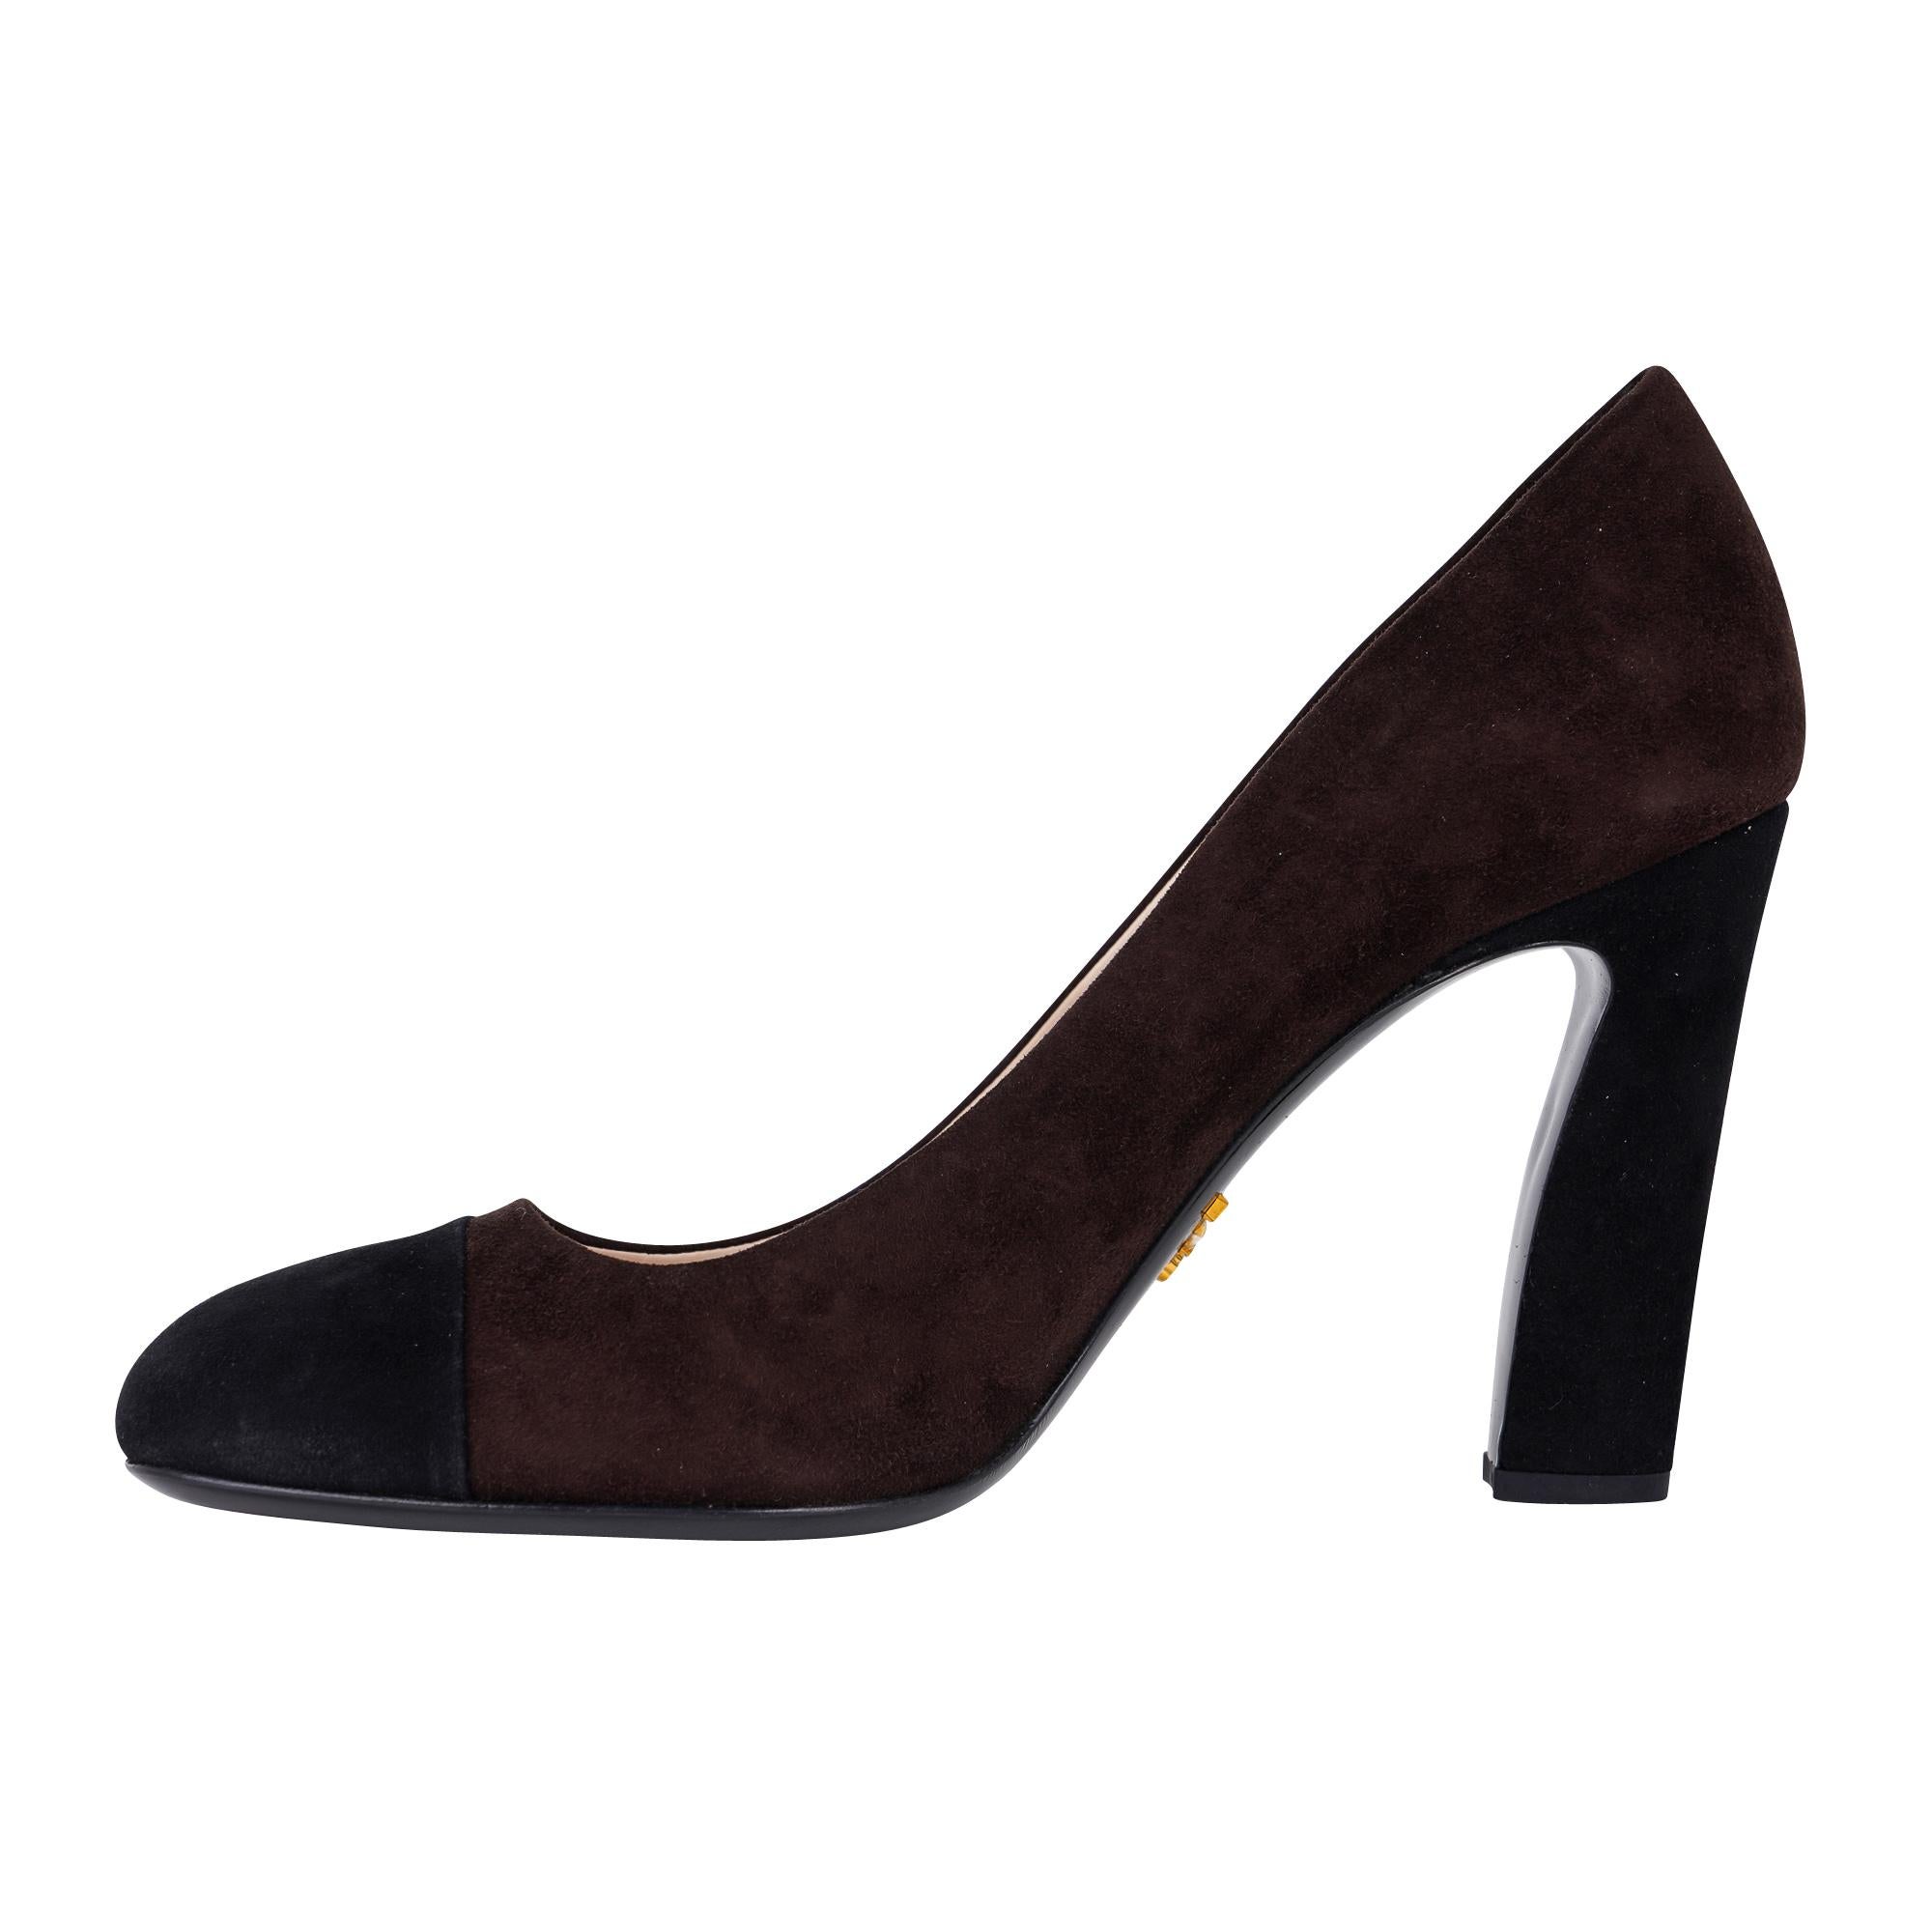 Prada Shoe Brown and Black Suede Pump 39 / 9 New In New Condition For Sale In Miami, FL